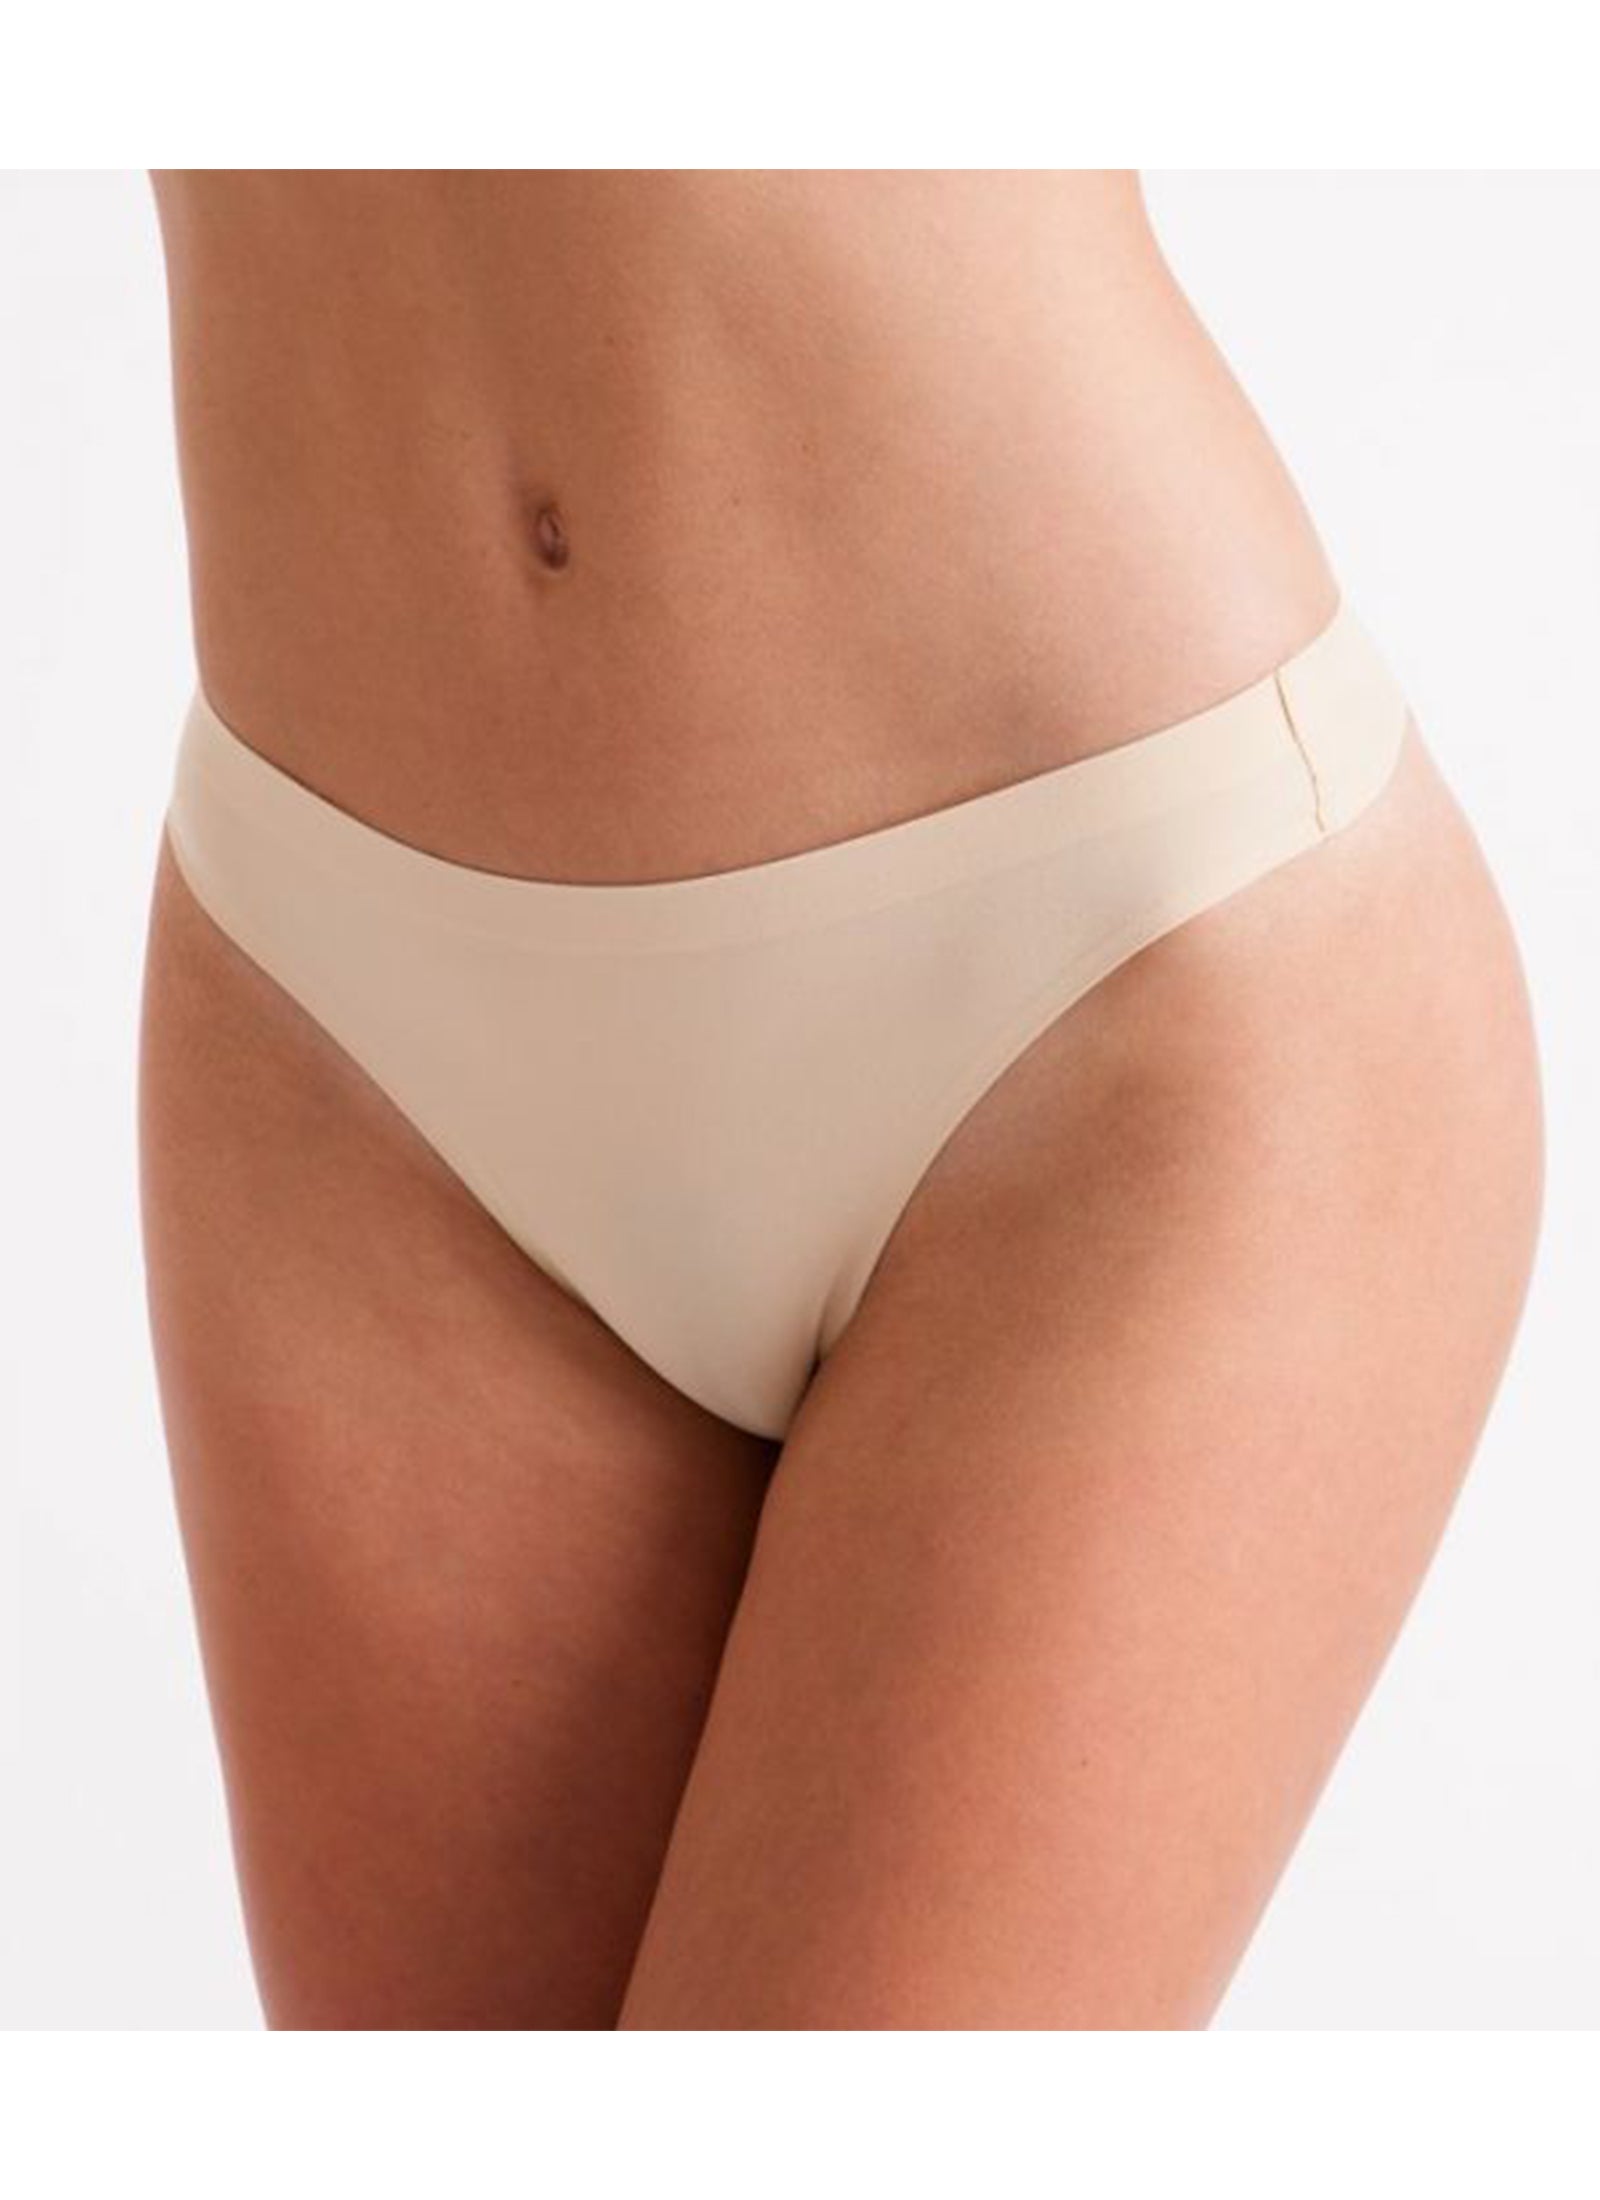 Adult Invisible Low Rise Thong